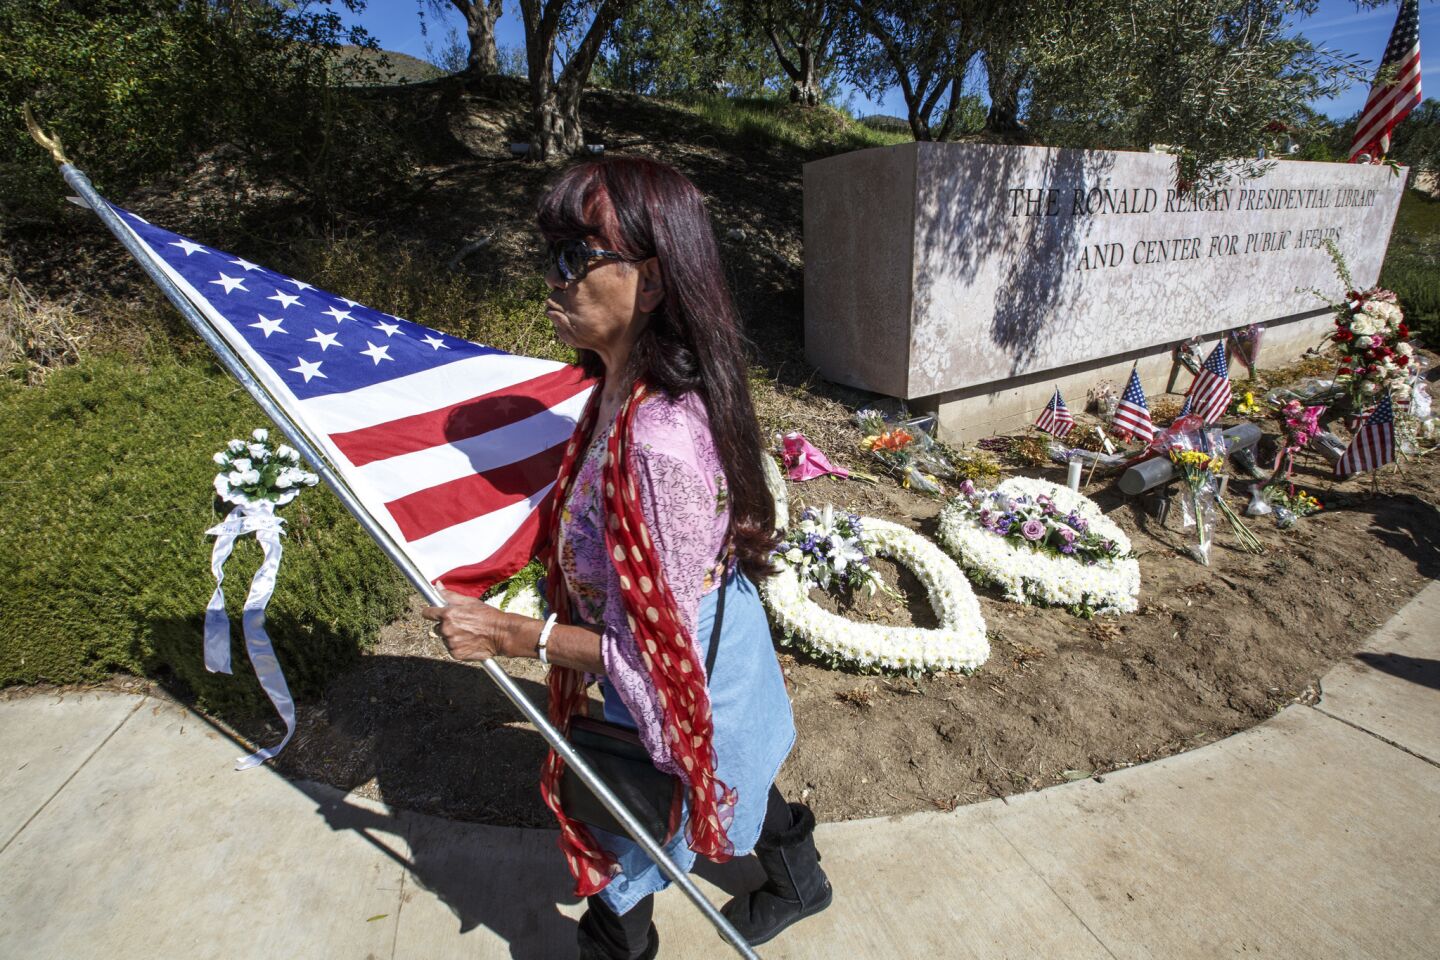 Flags and flowers are placed at the entrance to the Ronal Reagan Presidential Library as people wait for the motorcade bringing Nancy Reagan's body to lie in repose.